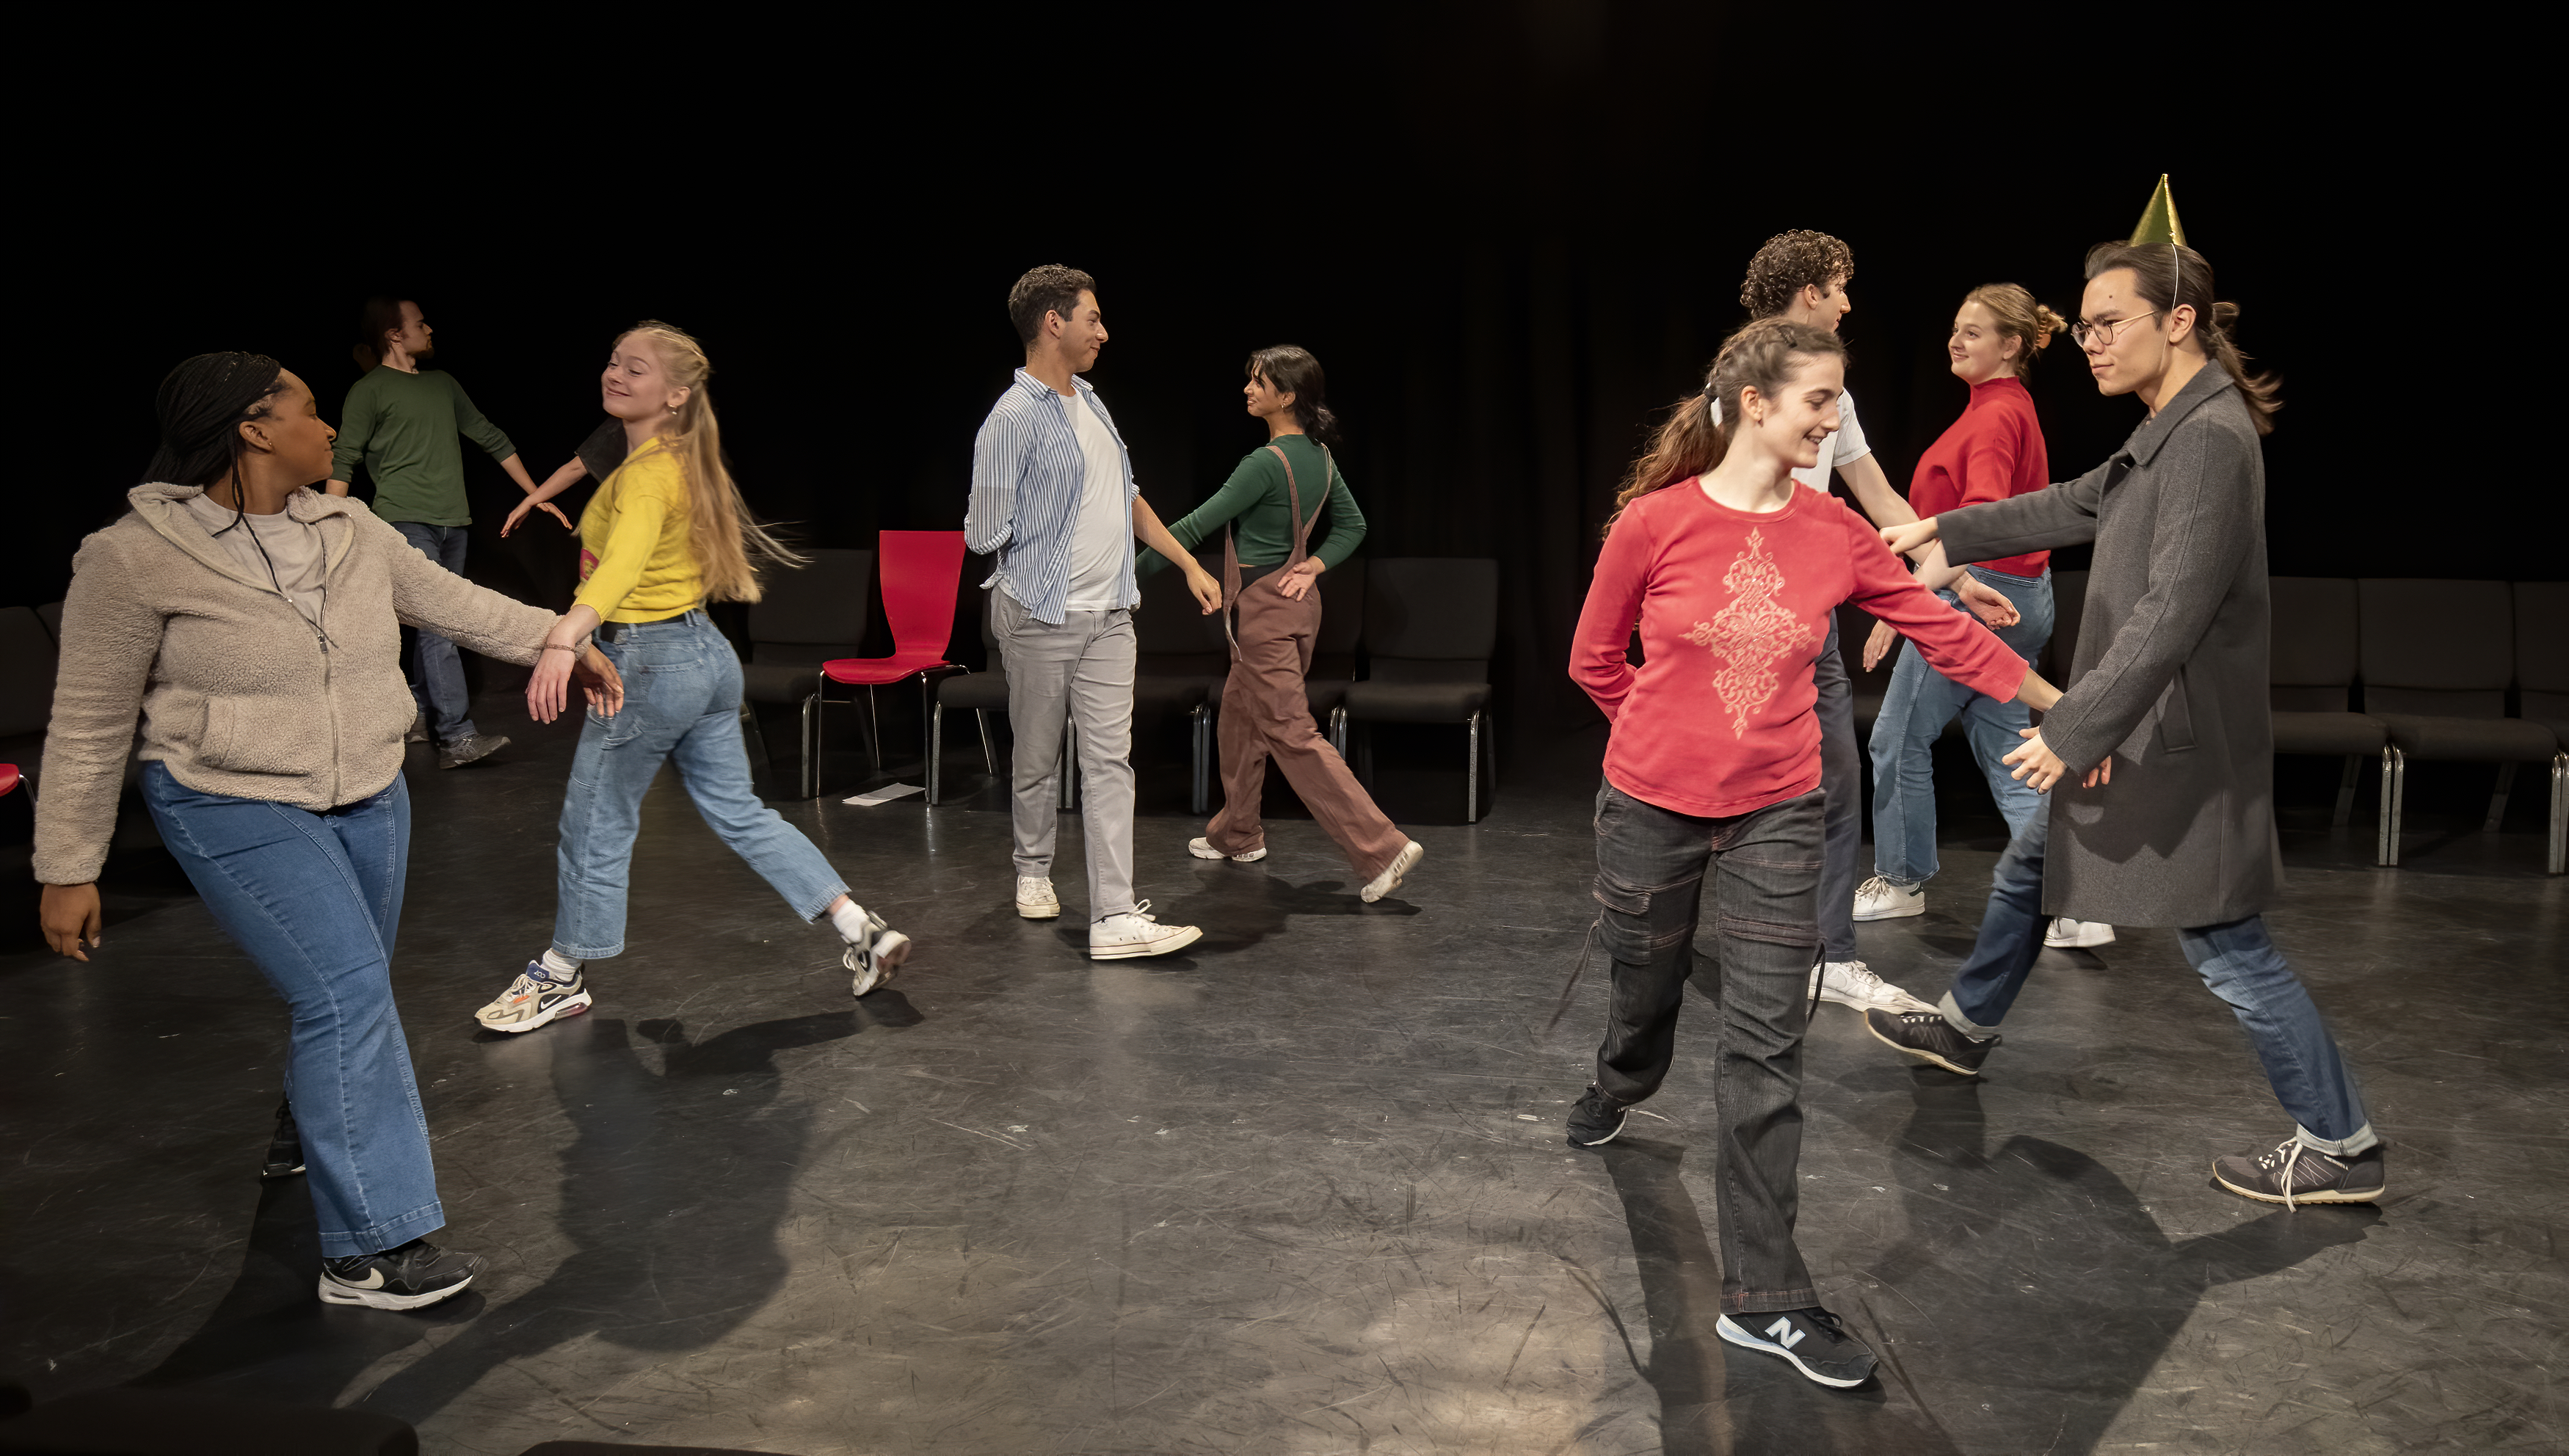 Students moving in mid-performance in a black box theatre